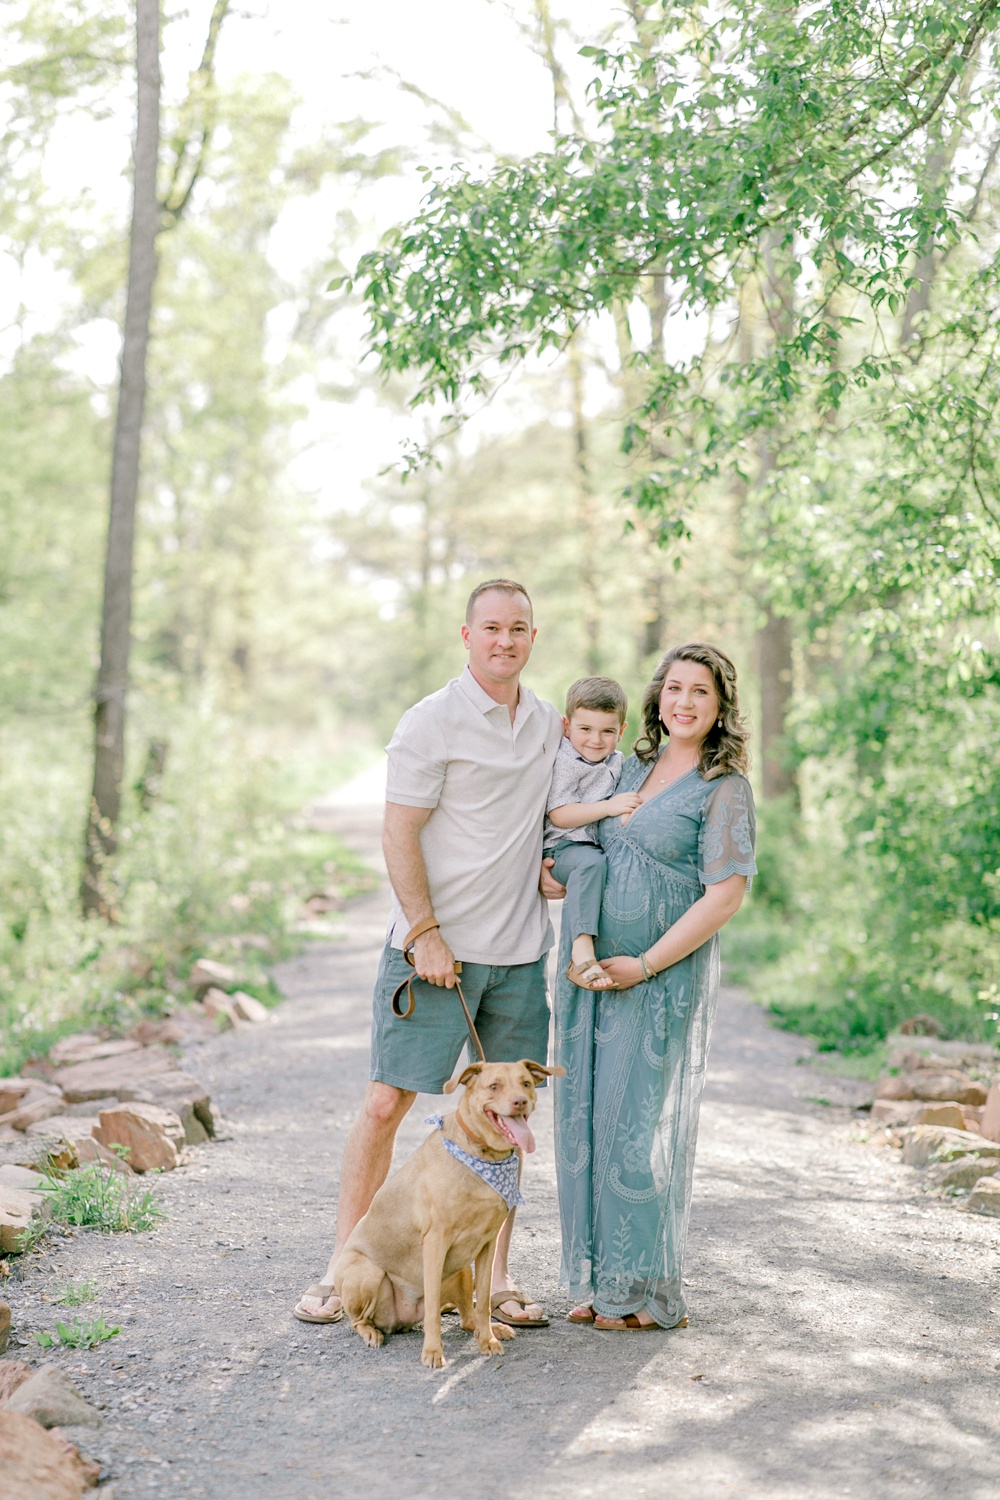 Maternity session outdoors with Sarah Botta Photography. Family image looking at camera with dog and young boy surrounded by trees.